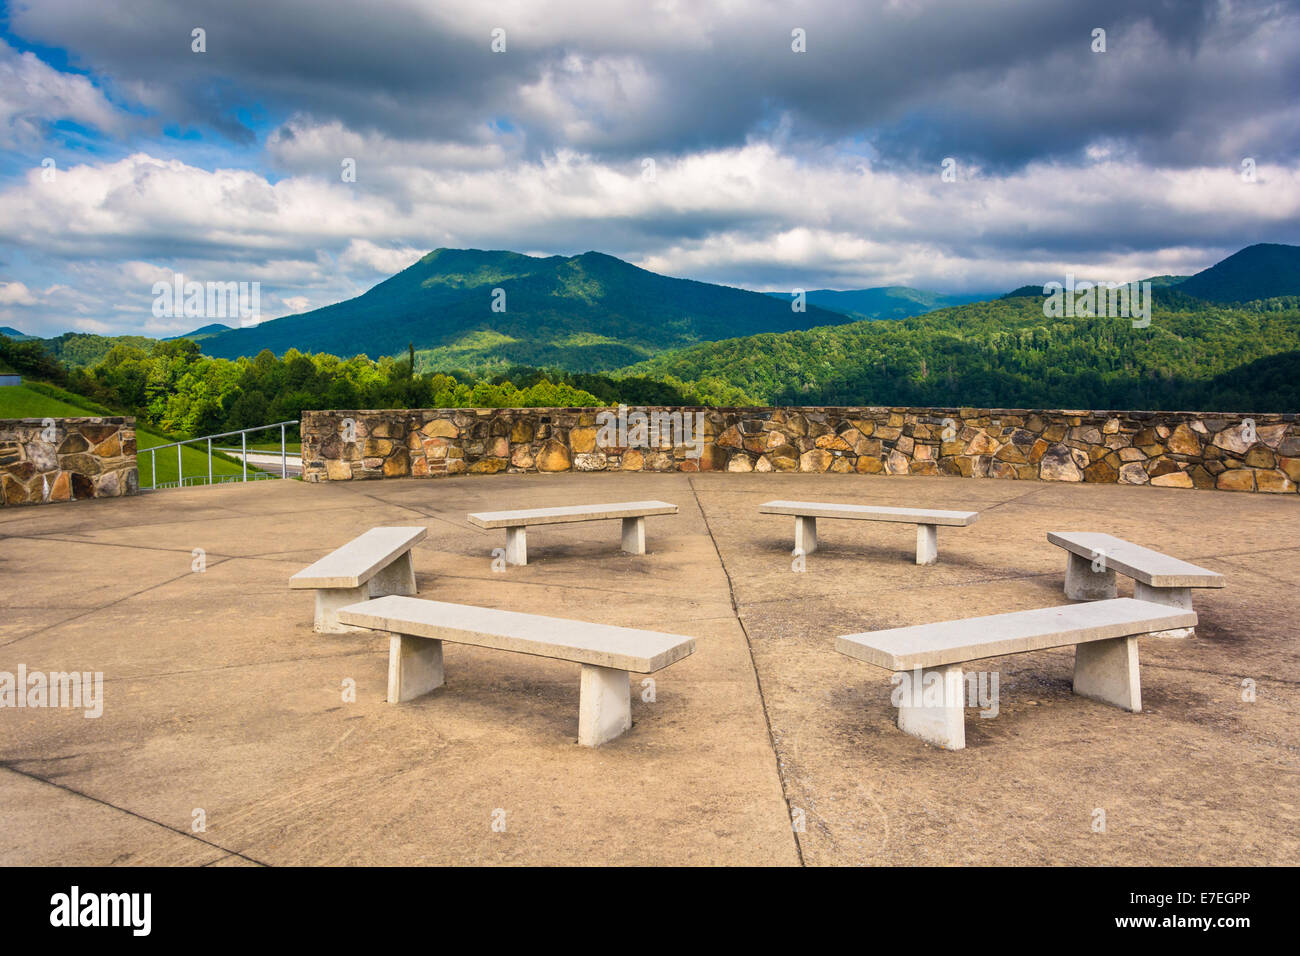 Benches and views of the Appalachian Mountains from Bald Mountain Ridge scenic overlook along I-26 in Tennessee. Stock Photo